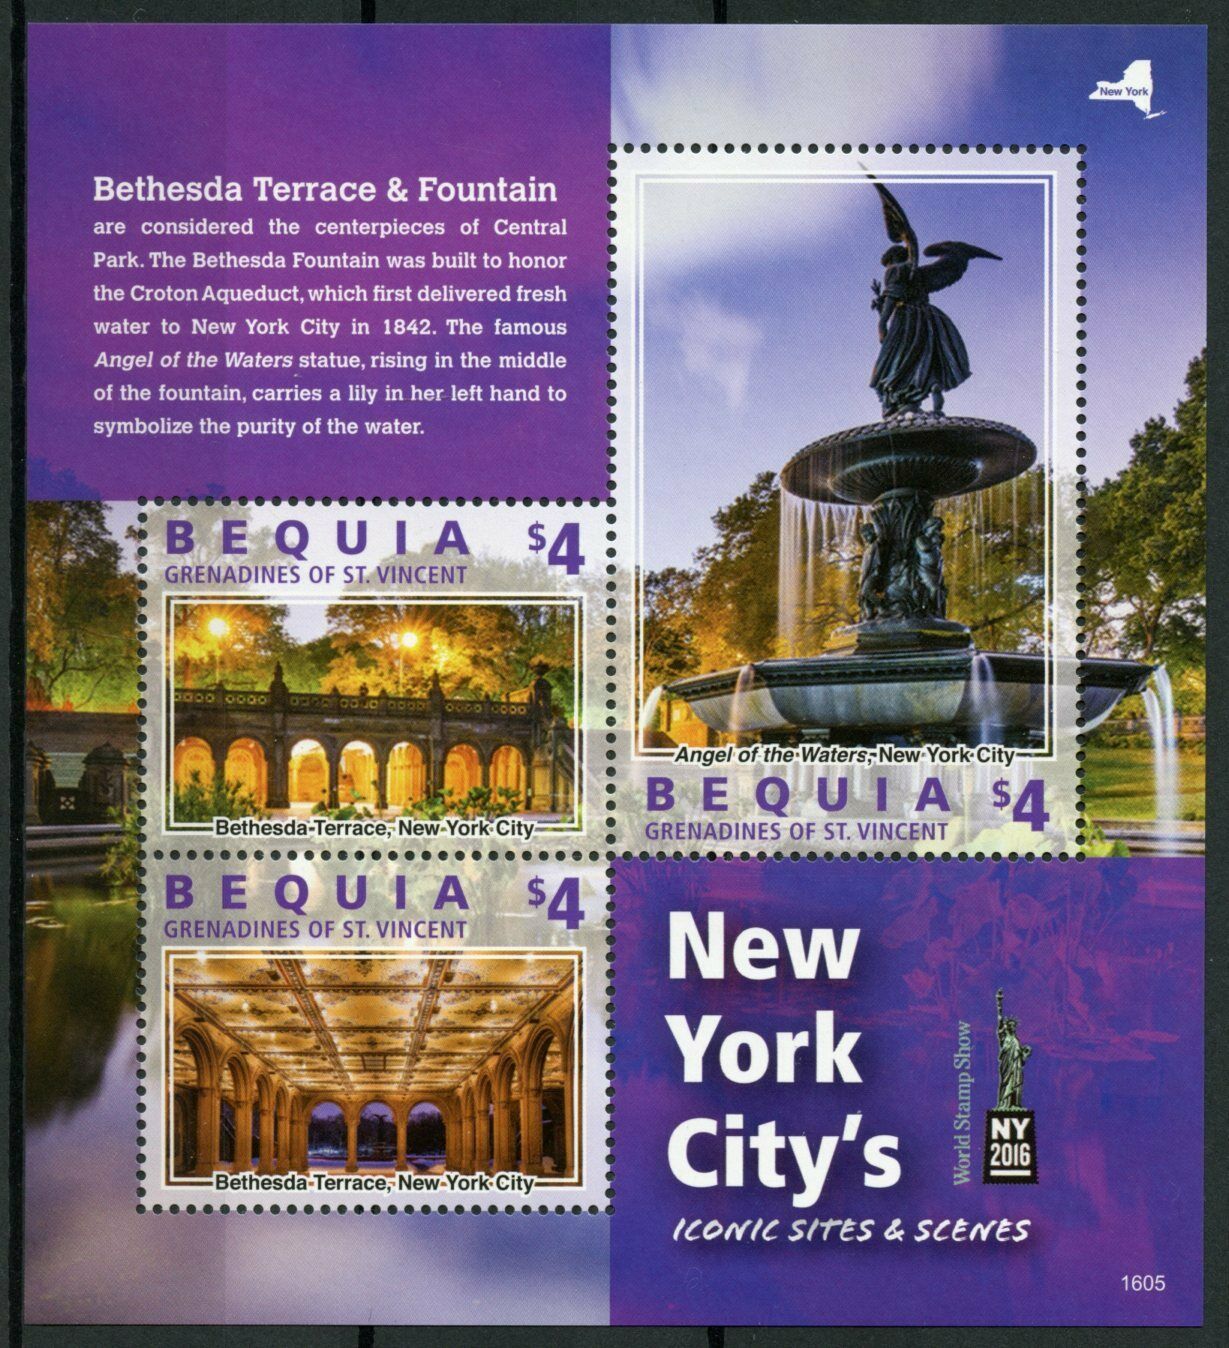 Bequia Gren St Vincent 2016 MNH Architecture Stamps New York Sites & Scenes NY2016 3v M/S